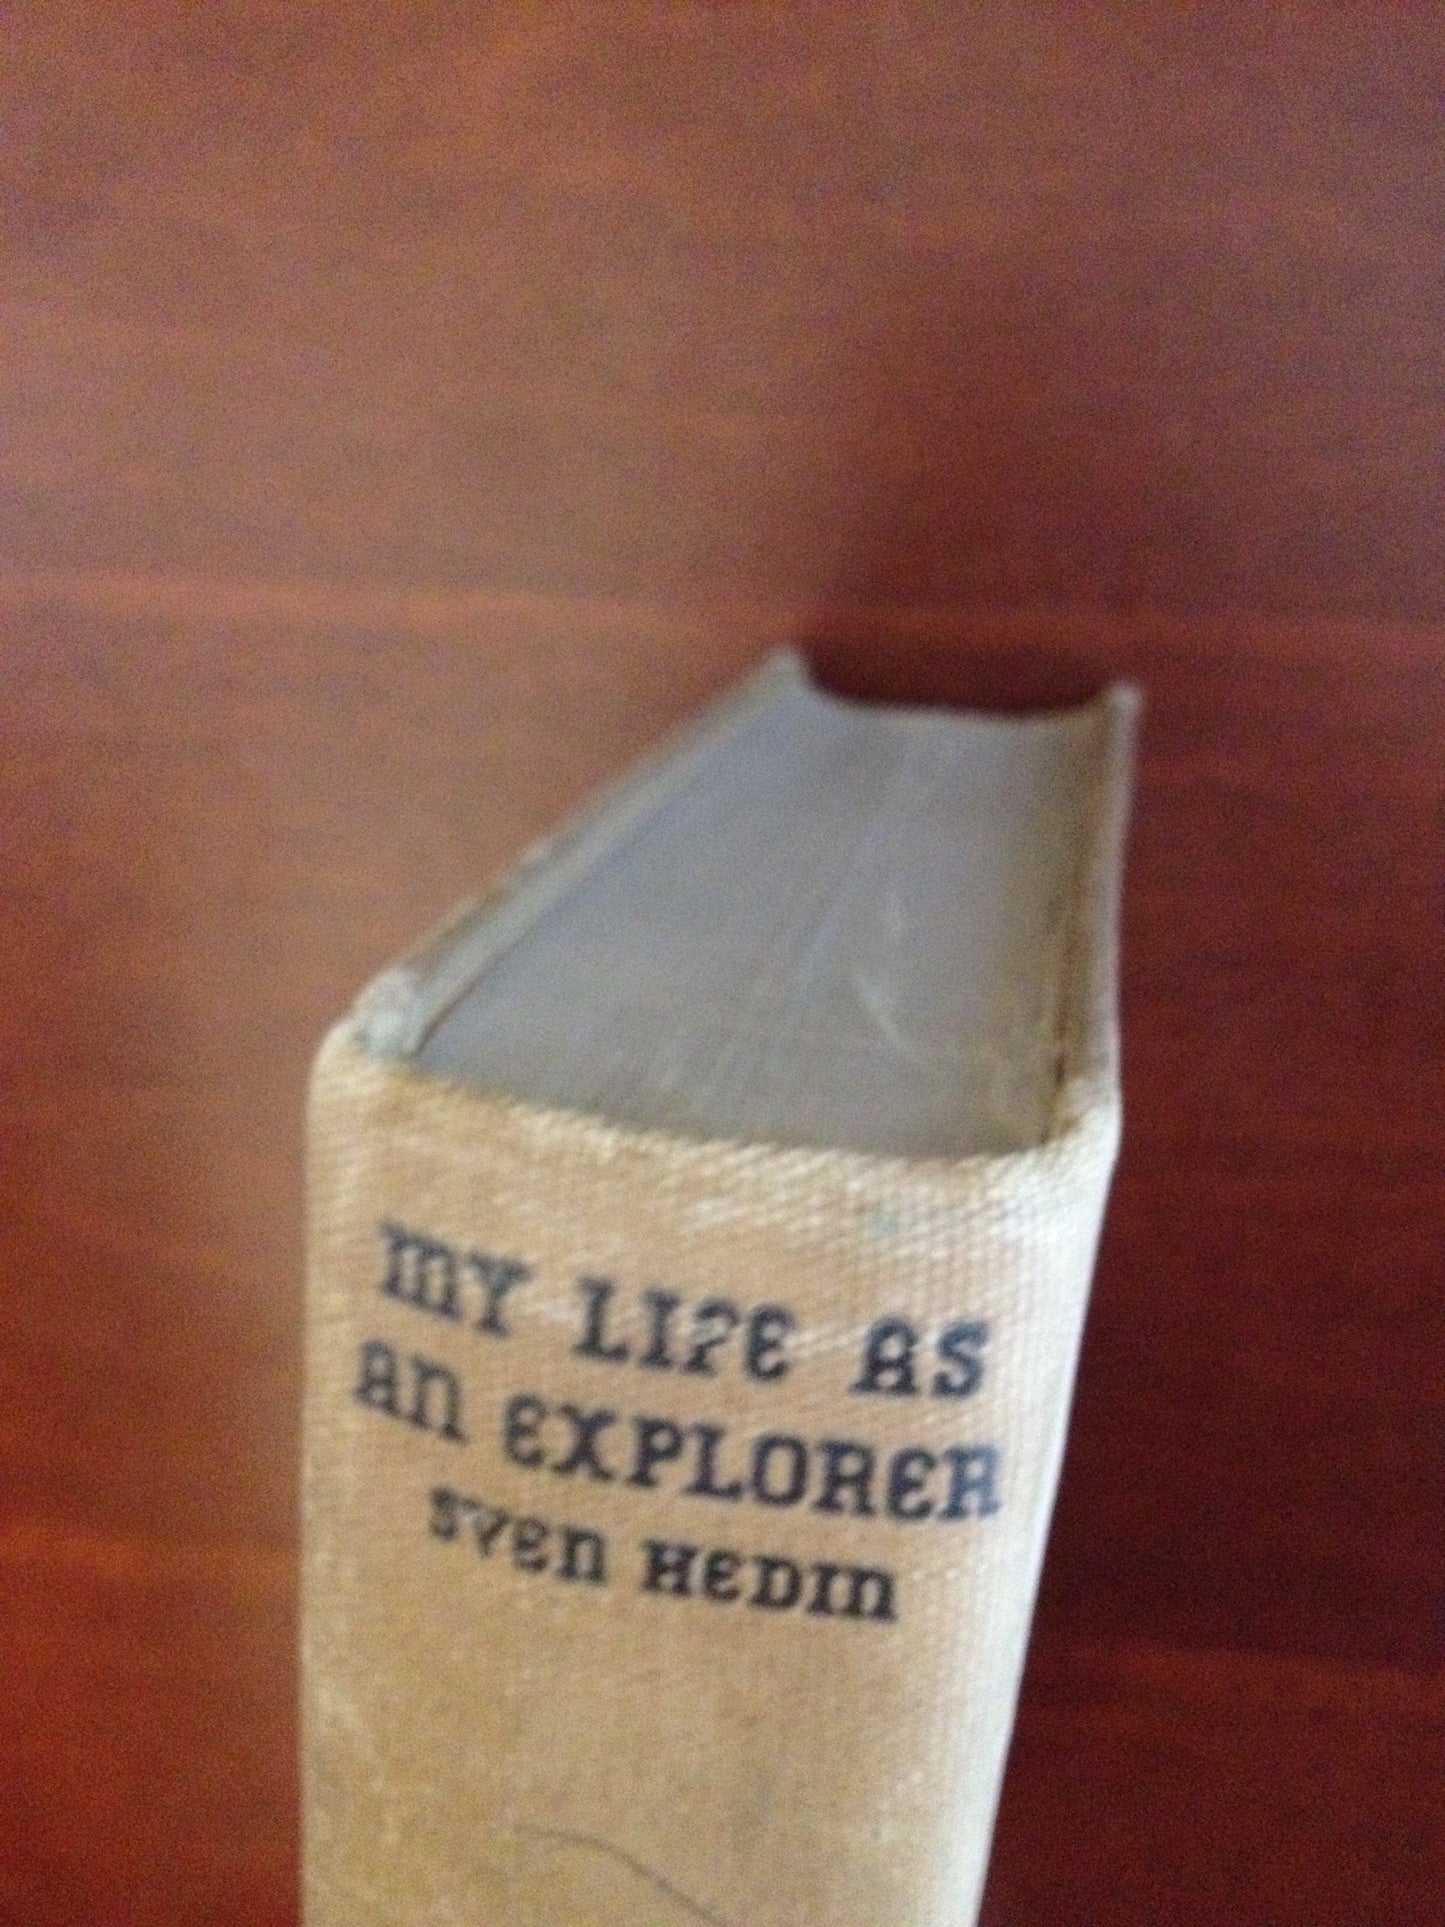 MY LIFE AS AN EXPLORER  BY: SVEN HEDIN BooksCardsNBikes